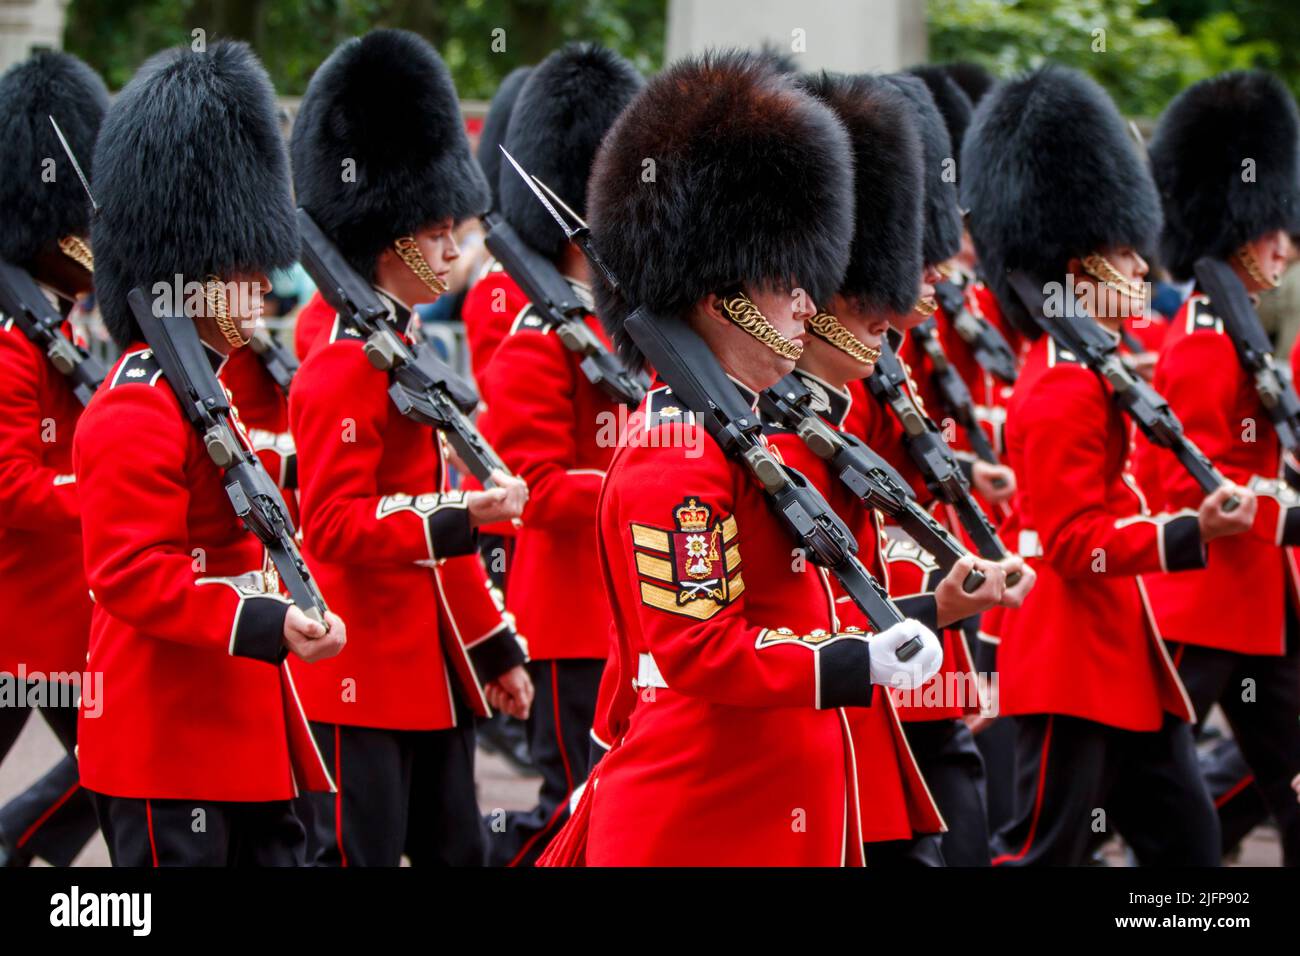 Scots Guards at Trooping the Color, Colonel’s Review in the Mall, London, England, Vereinigtes Königreich am Samstag, 28. Mai 2022. Stockfoto